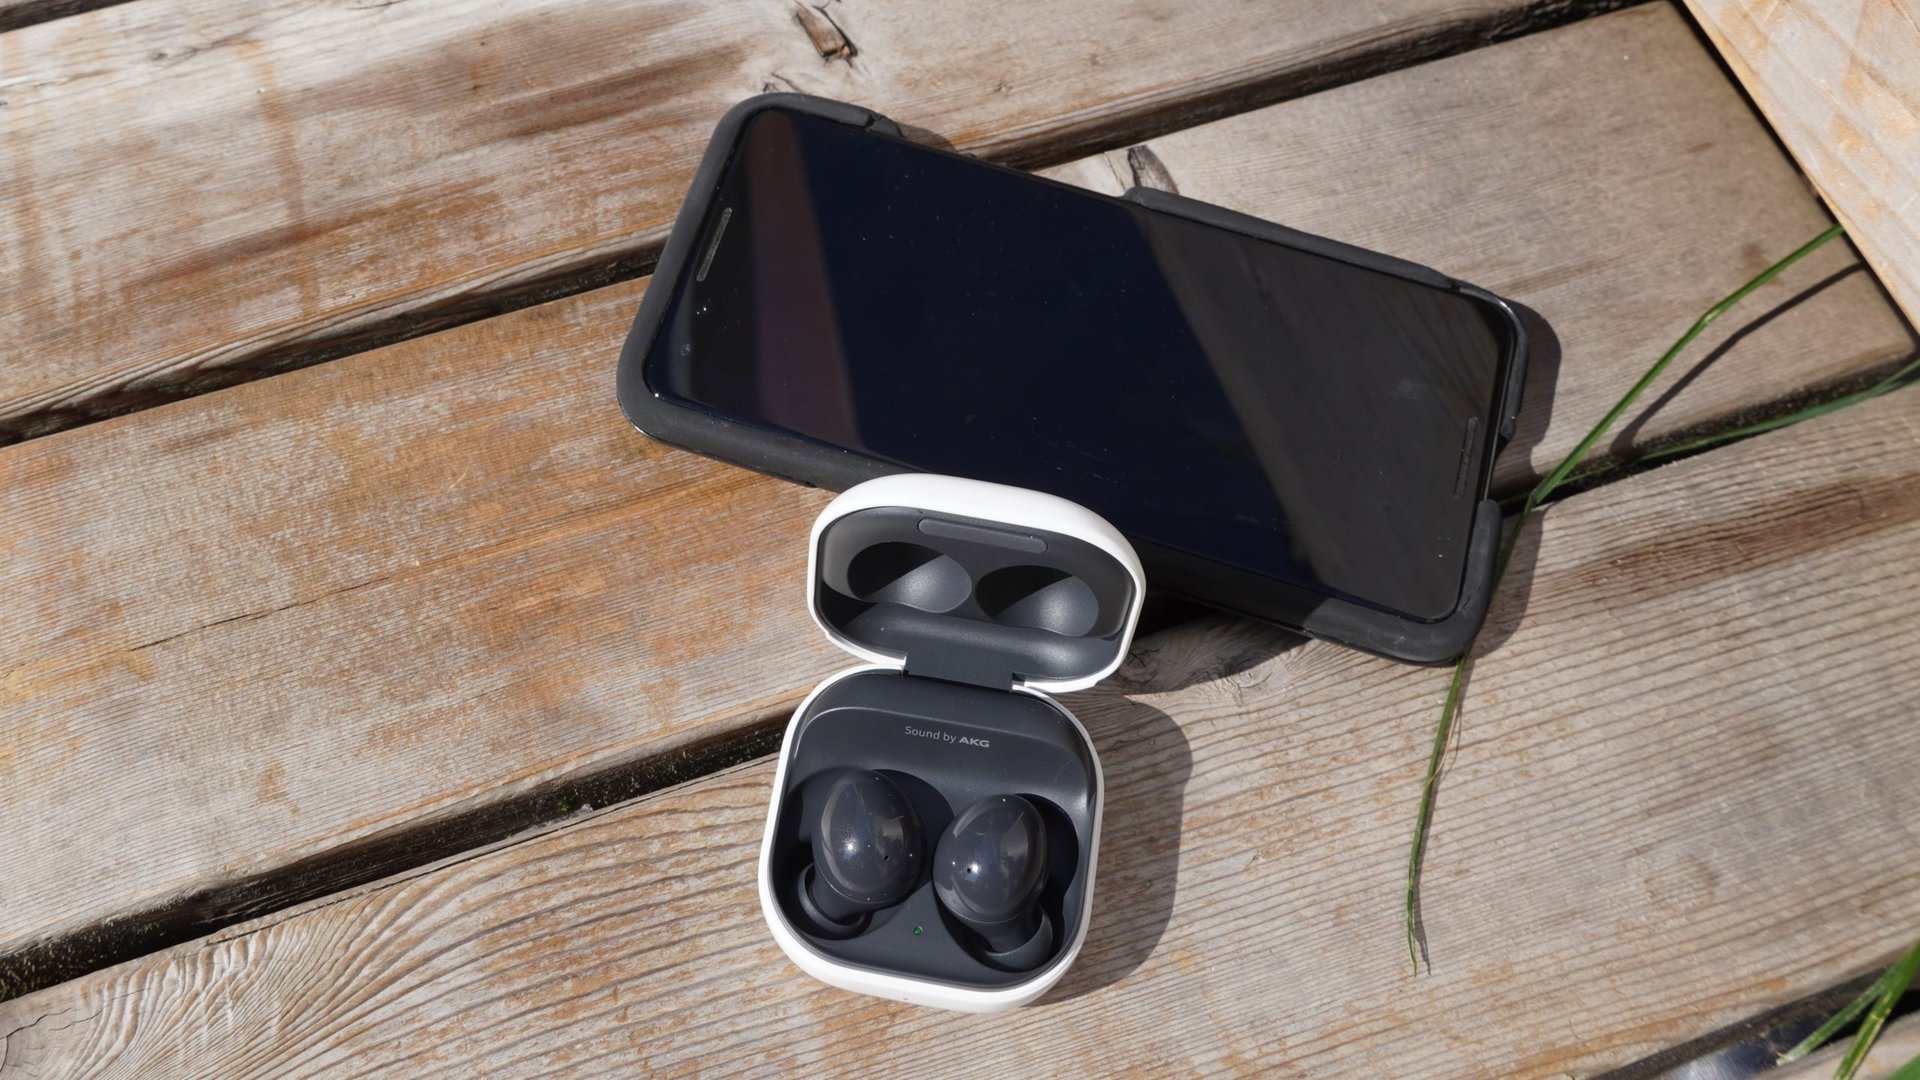 The Galaxy Buds 2 in their case sitting next to a smartphone on a wooden bench outdoors.